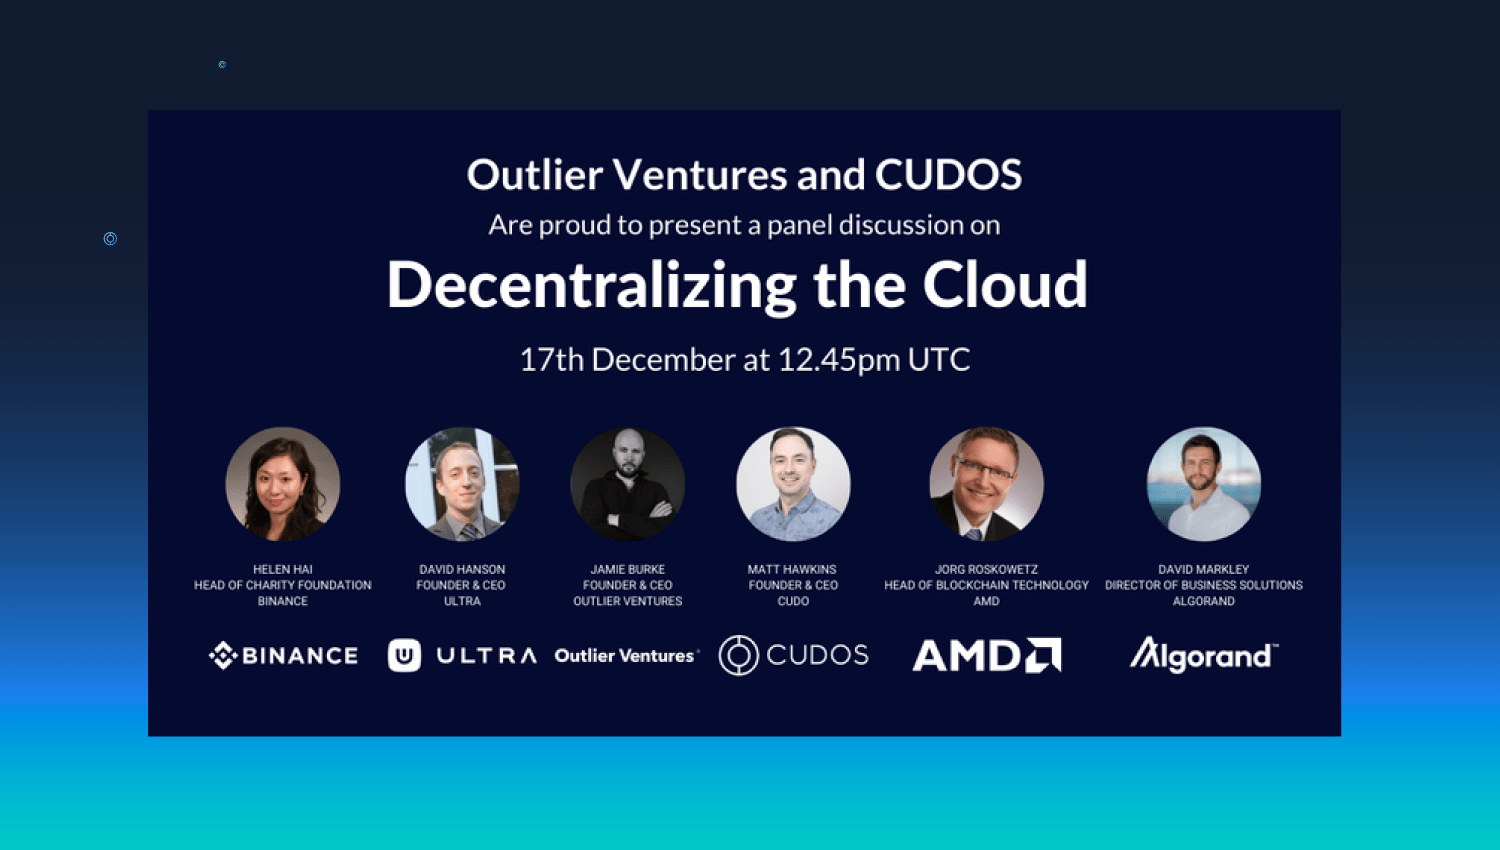 Panel Discussion Featuring Blockchain Leaders from AMD, Algorand Binance, Ultra and Cudo